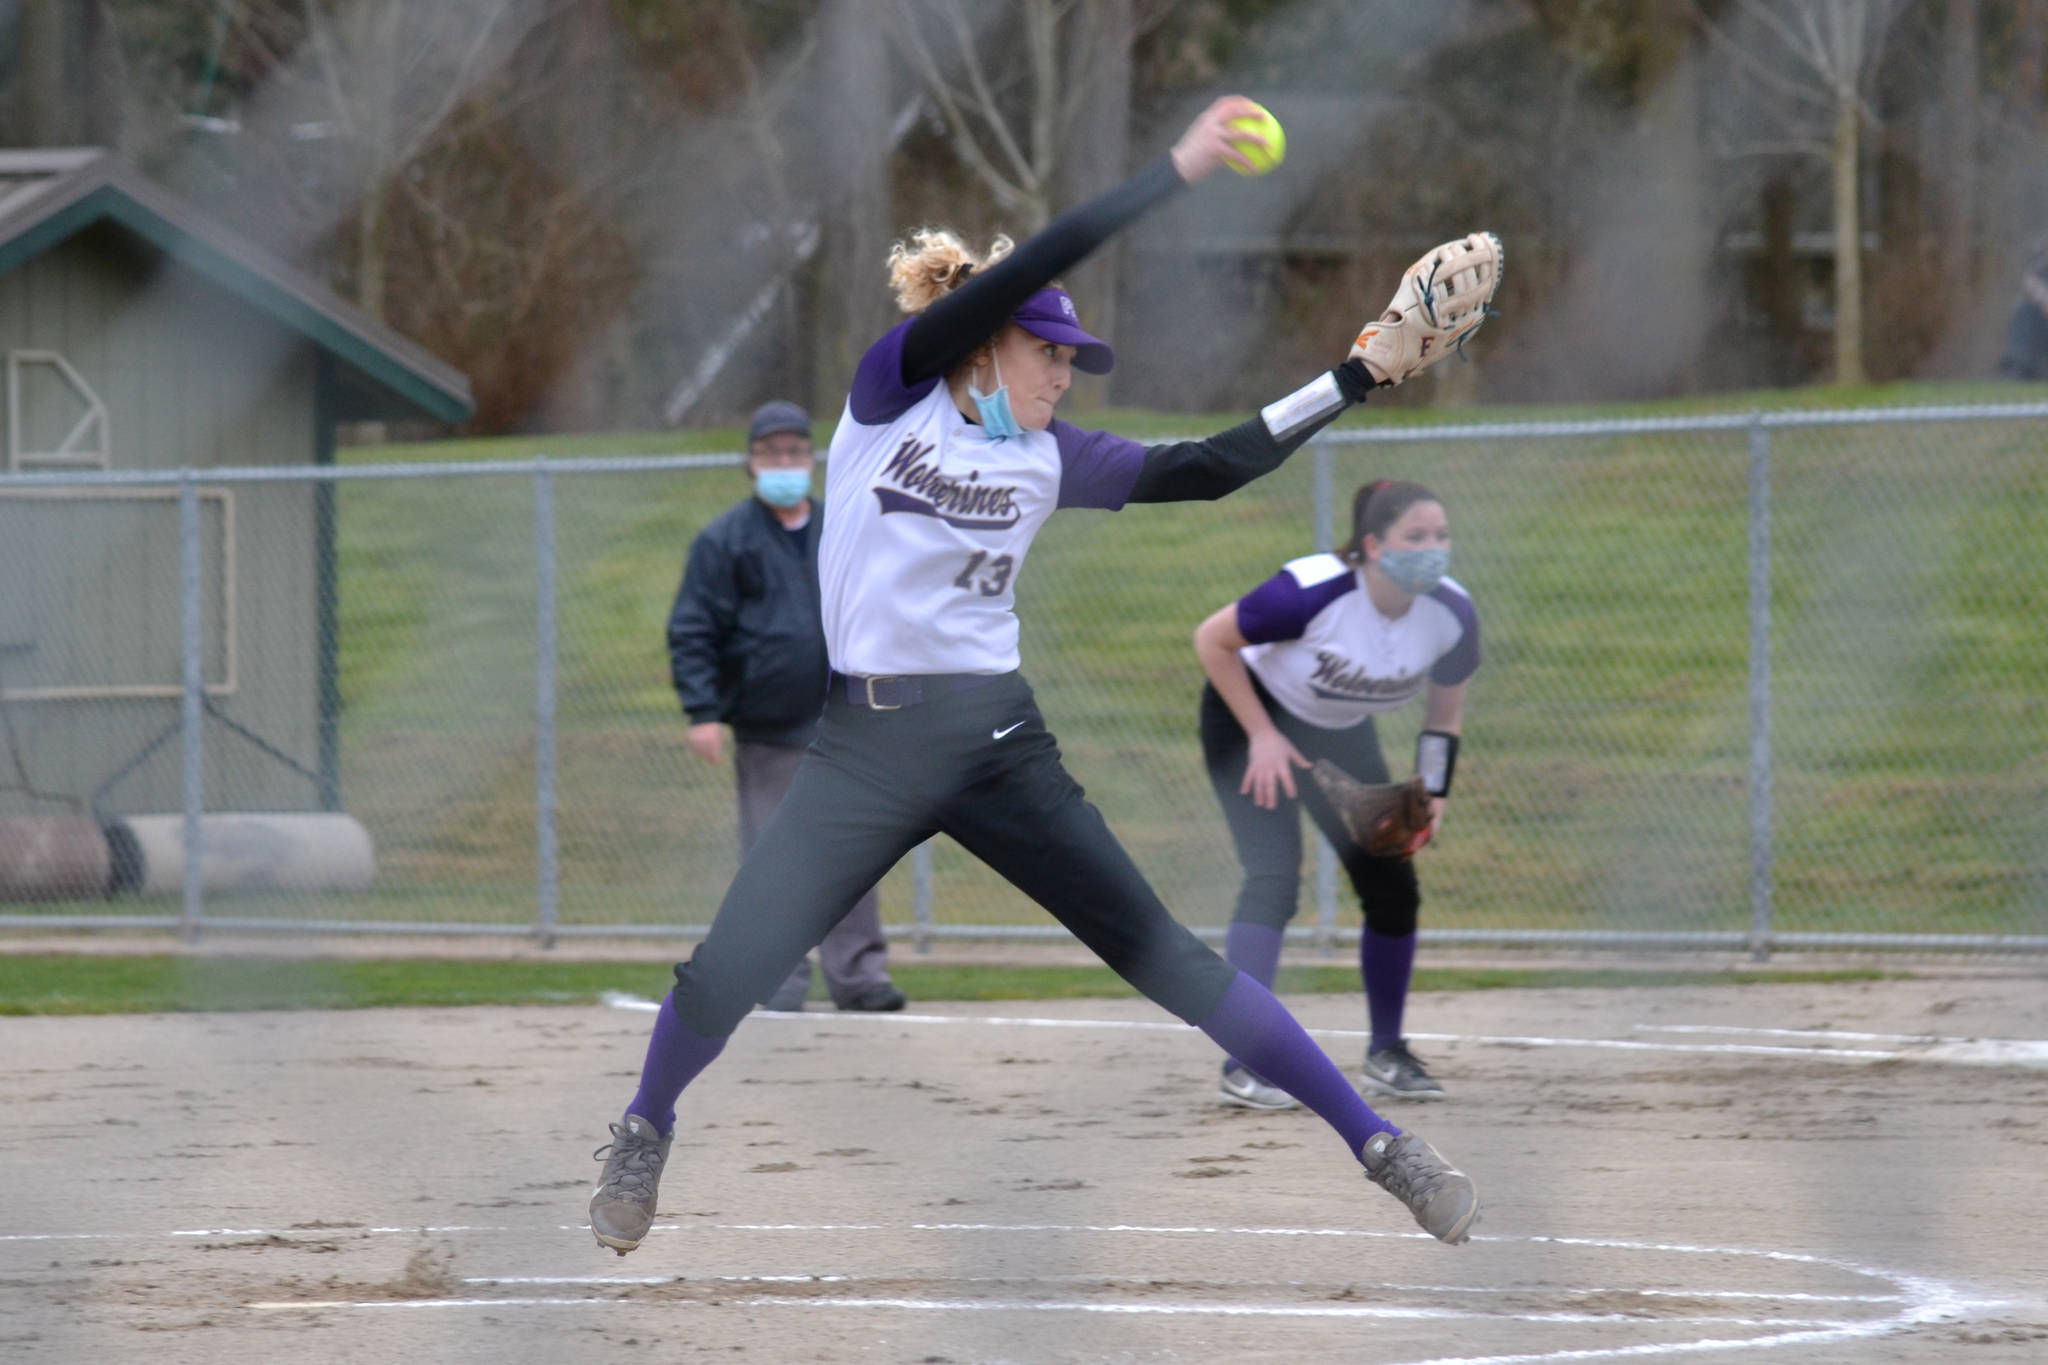 Senior Raylee Miniken pitches against Coupeville on March 19. The girls lost 8-3 at home against the Wolves. (Jennifer Ayers/contributed photo)